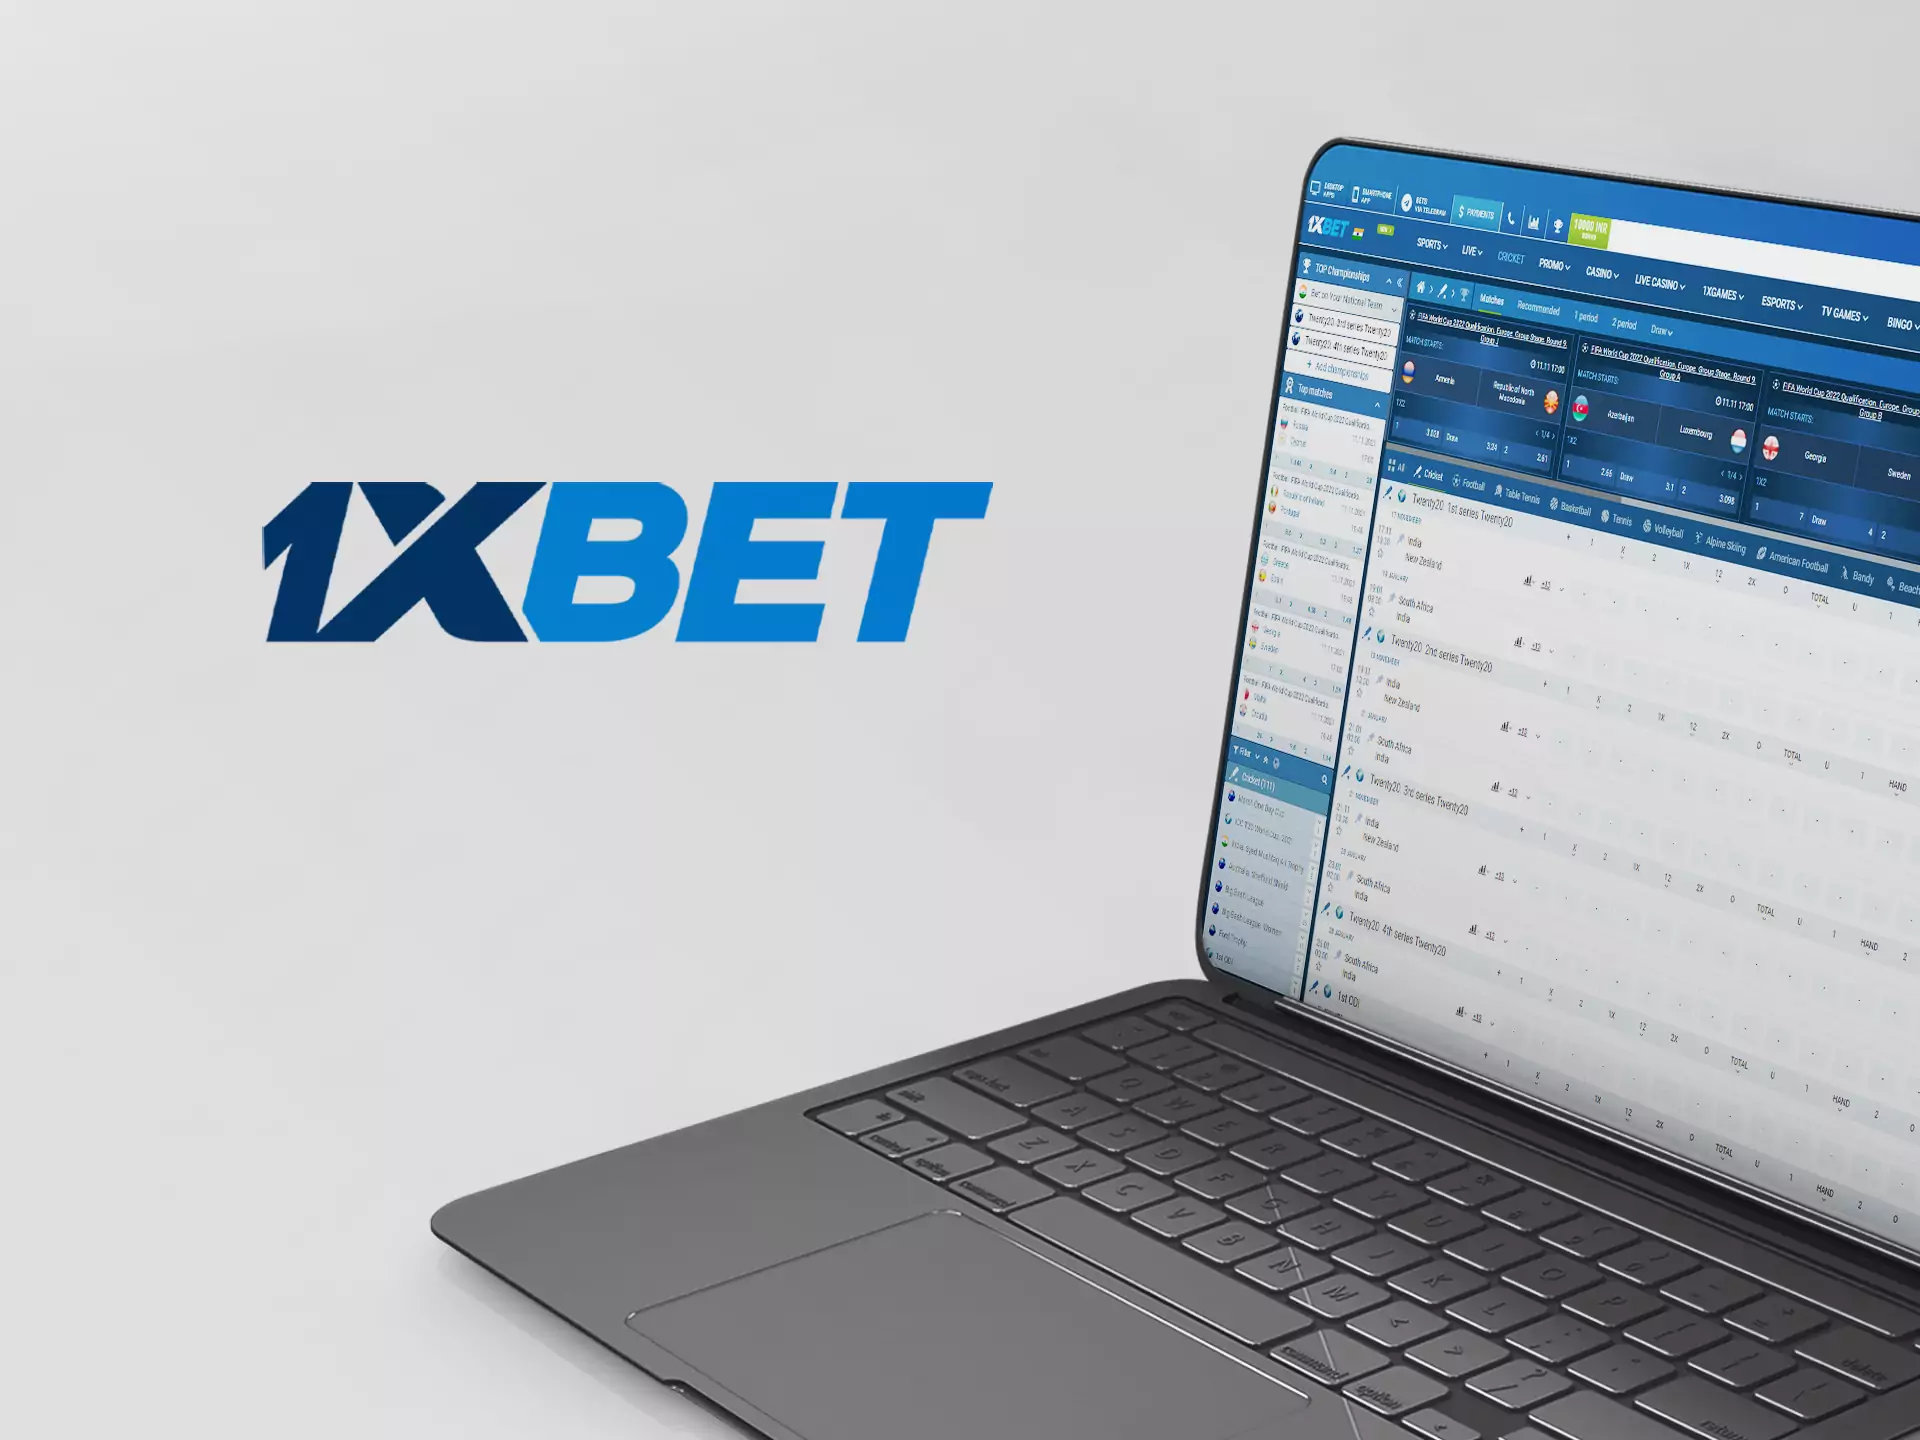 The 1xbet bookmaker works under the Curacao license as well.